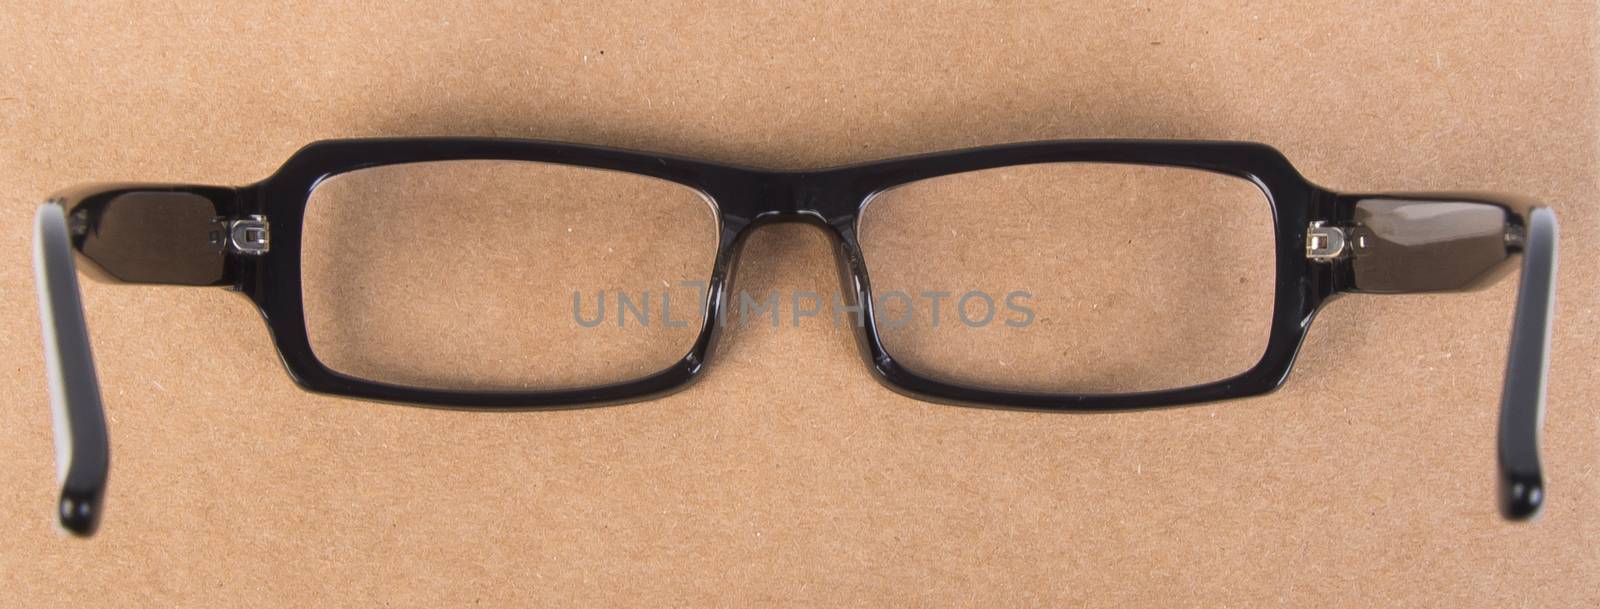 eye glasses. eye glasses with book on the background by heinteh